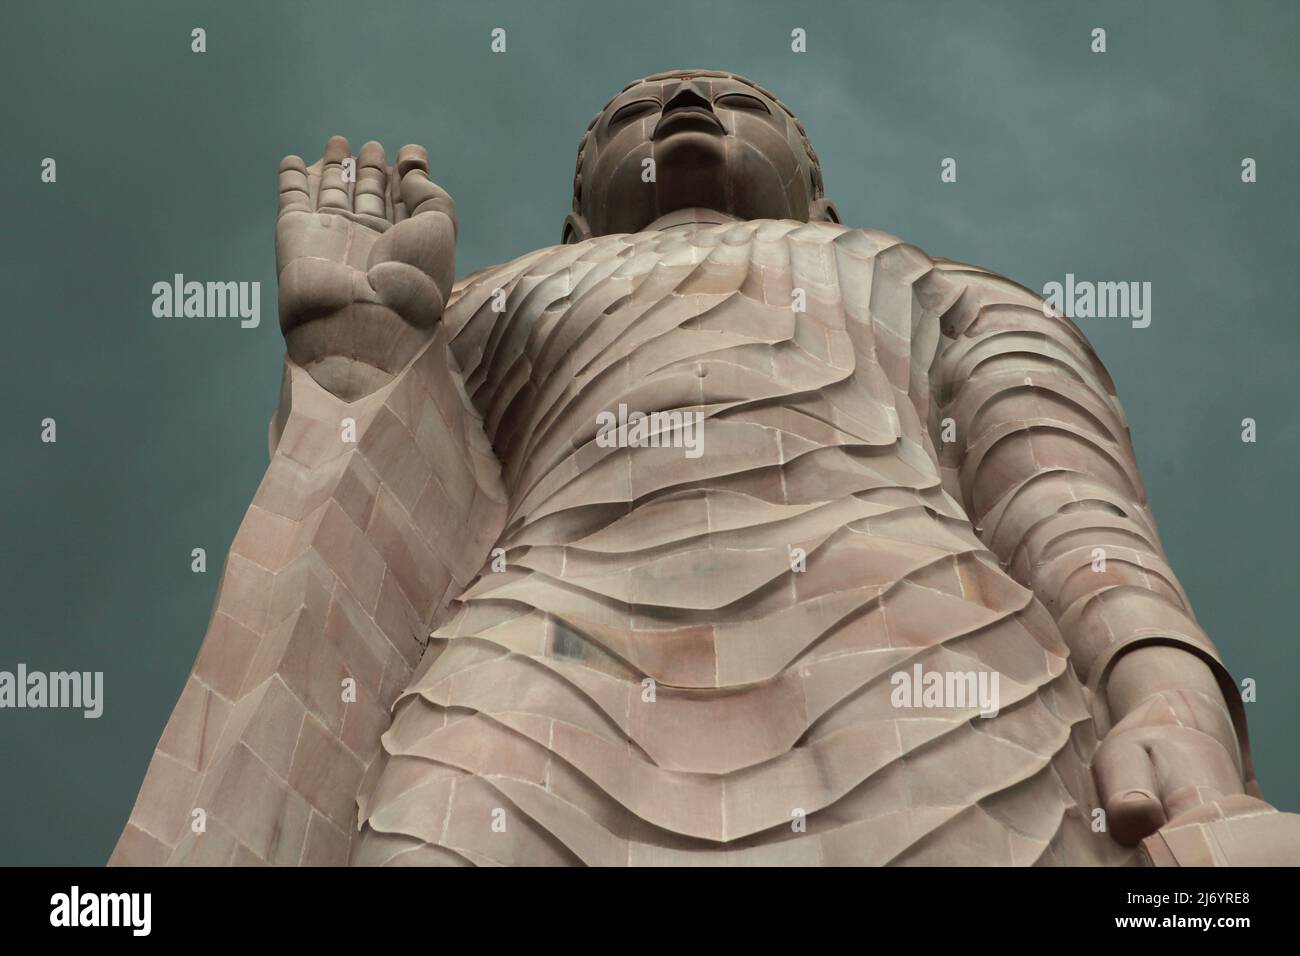 A 80-feet-high sandstone statue of Standing Buddha in Sarnath on the outskirts of Varanasi, Uttar Pradesh, India. Constructed from 1997 to 2011, the statue was a result of a joint effort between Thailand and India. Stock Photo